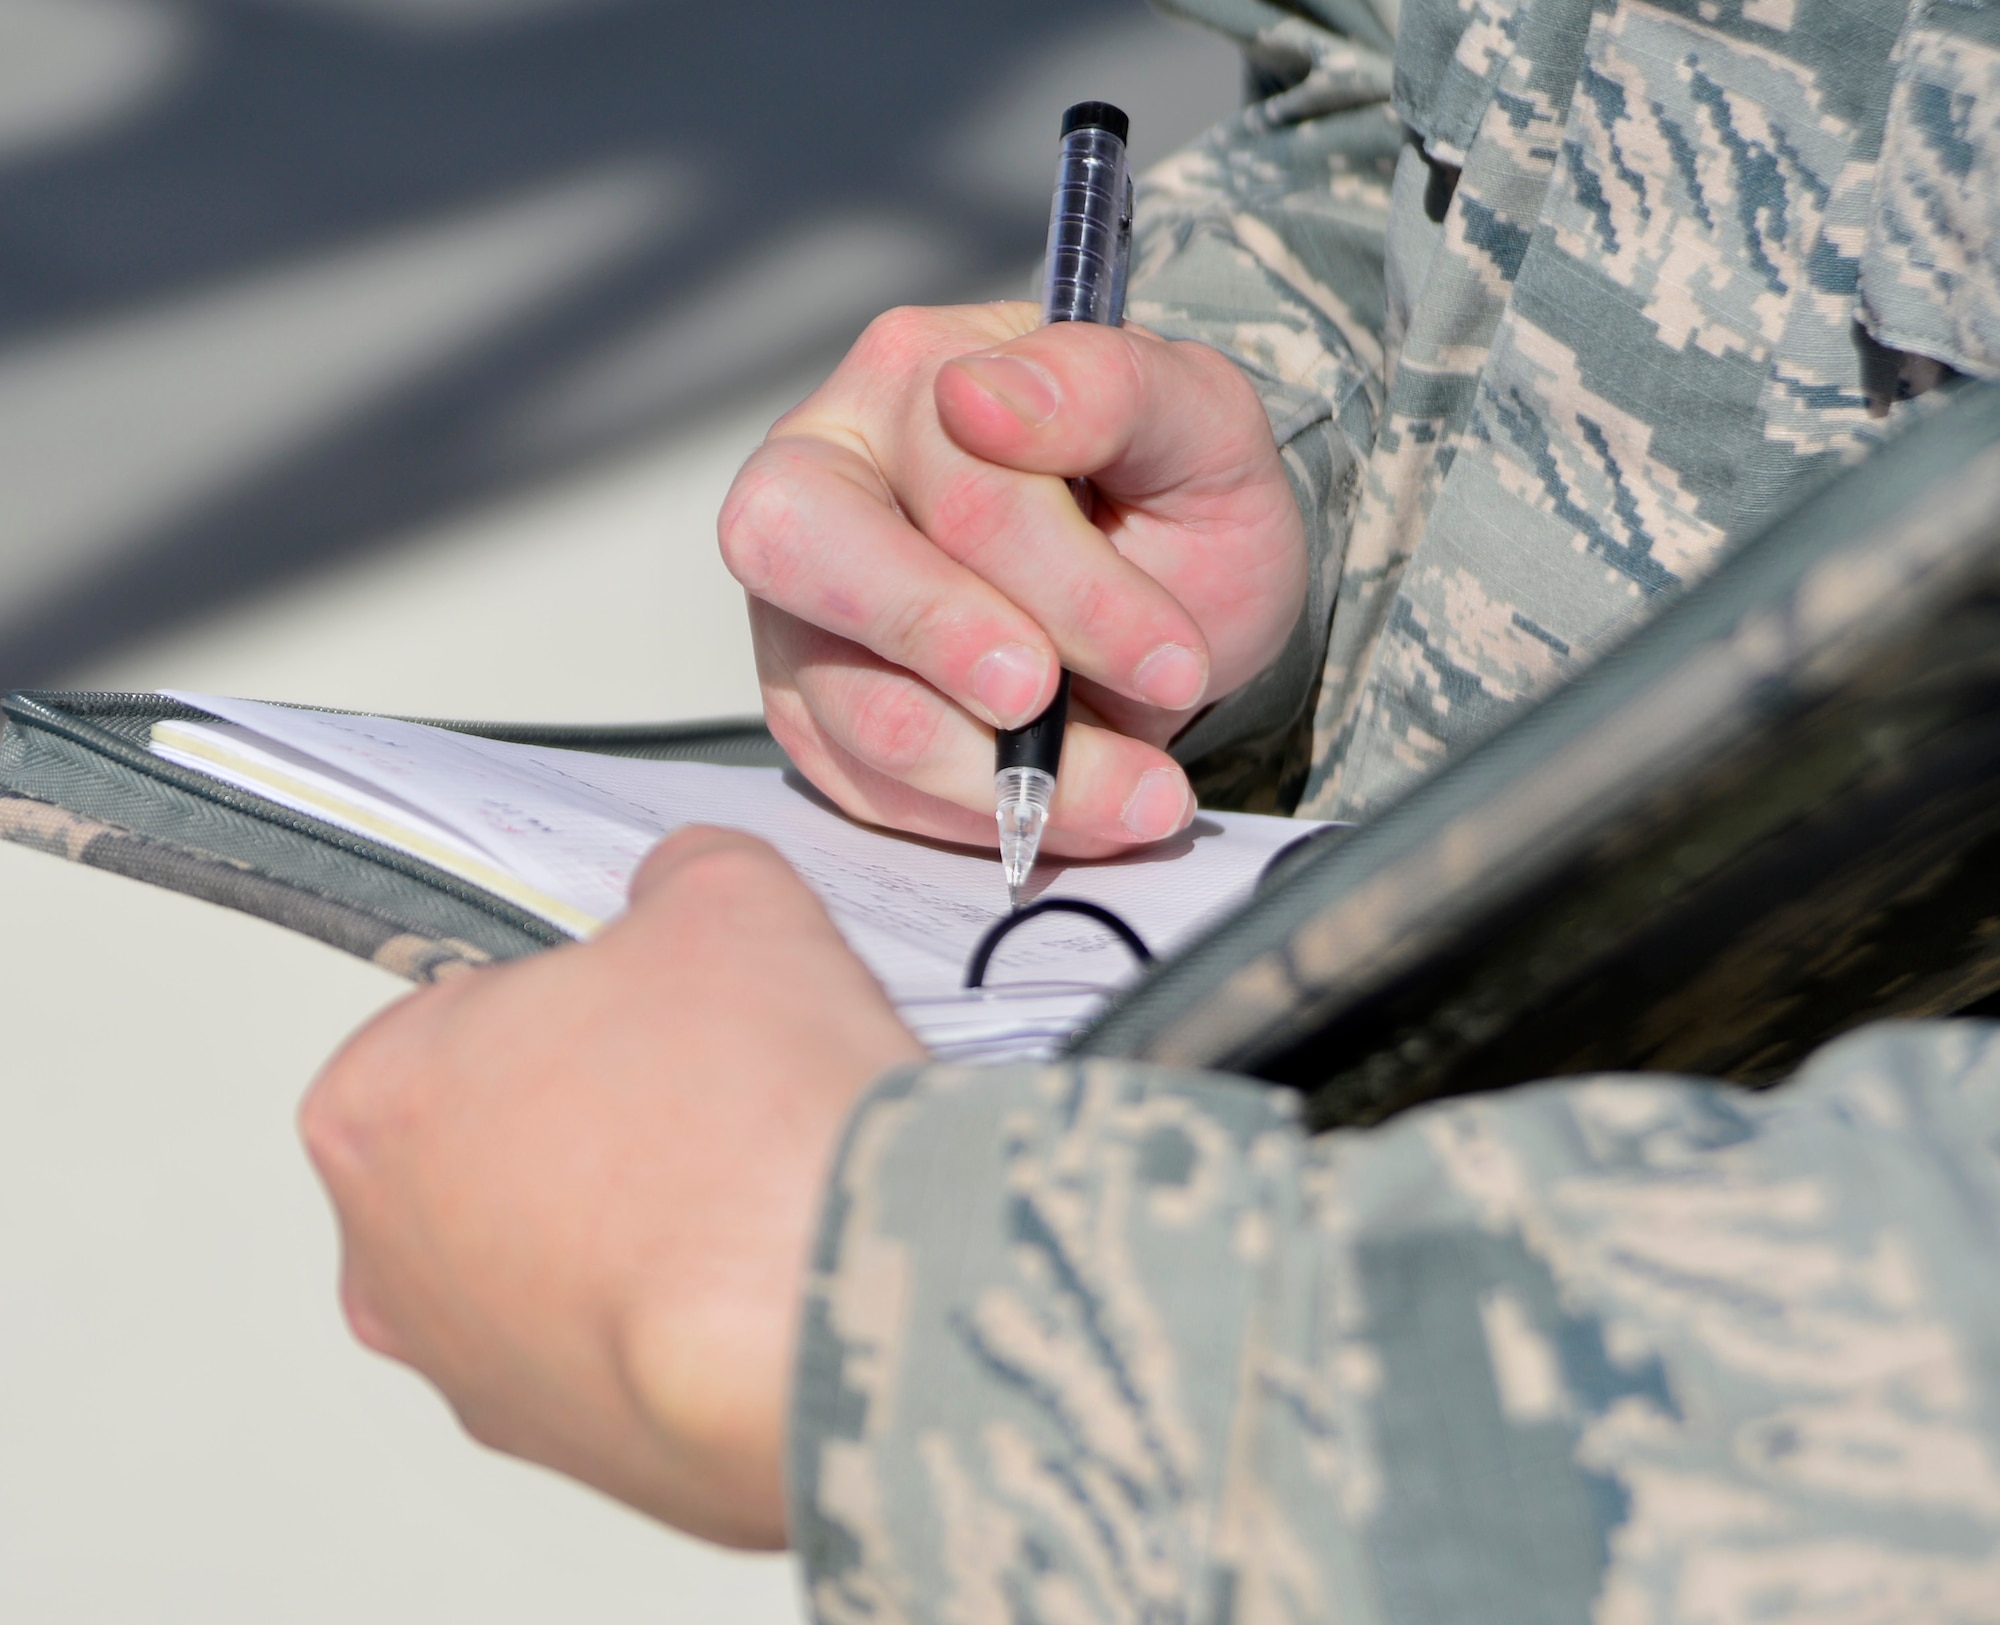 Tech. Sgt. Remington, 432nd Maintenance Group quality assurance inspector, takes notes as a 432nd Aircraft Maintenance Squadron Tiger Aircraft Maintenance Unit team checks the weight and balance of an MQ-1 Predator May 3, 2016. QA personnel are accountable for being knowledgeable and well-trained, enforcing the standards, and inspecting all the work performed on the MQ-1 Predator and MQ-9 Reaper within the 432nd Maintenance Group. (U.S. Air Force photo by Senior Airman Christian Clausen/Released)